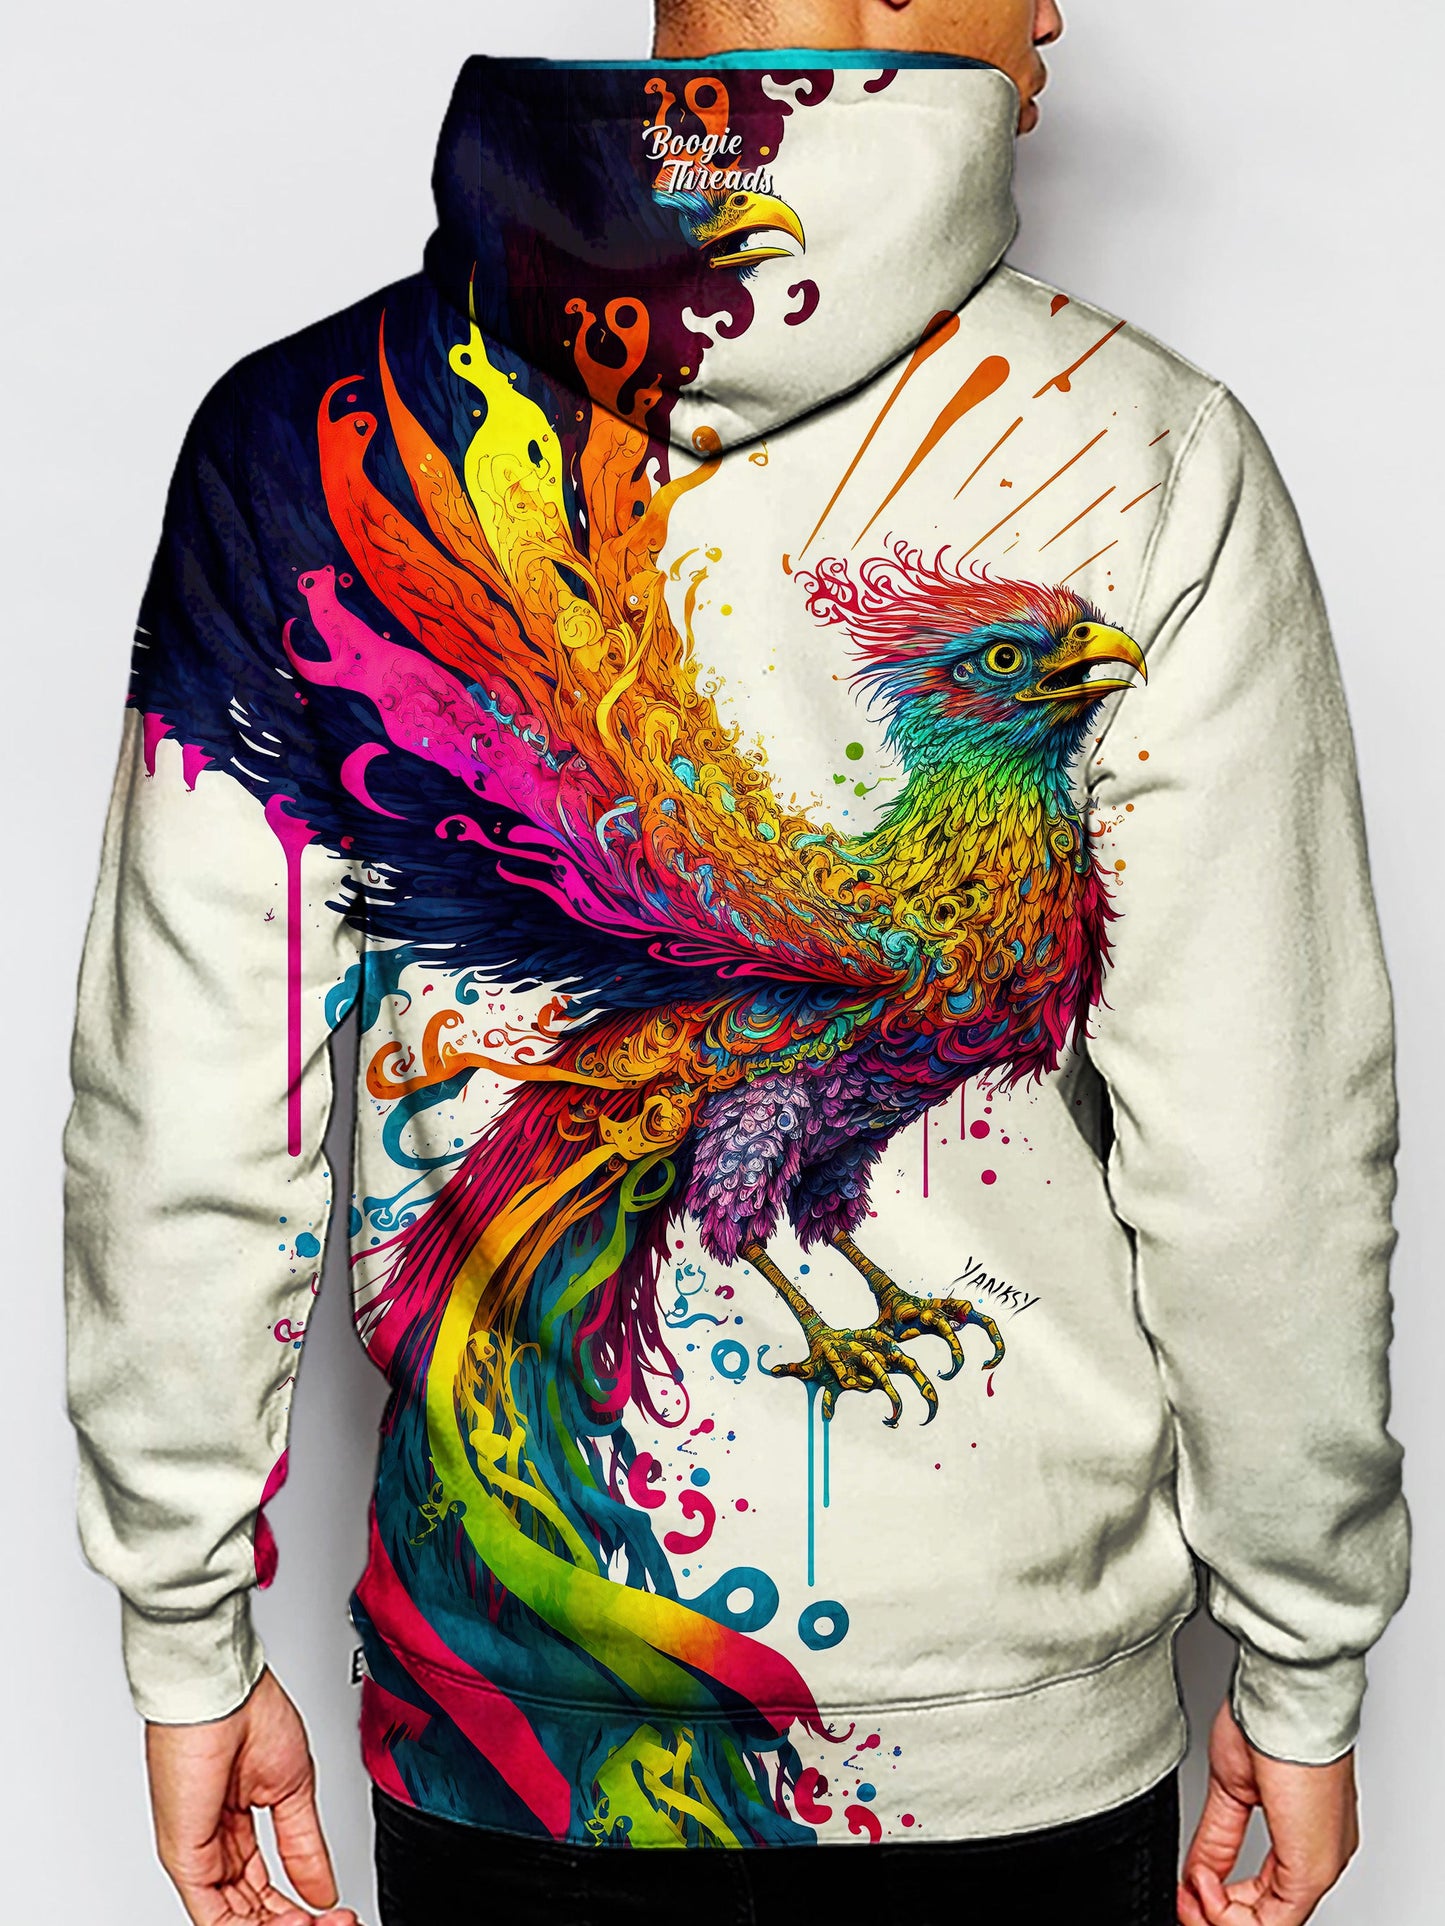 Embrace your unique style with this bright and colorful hoodie